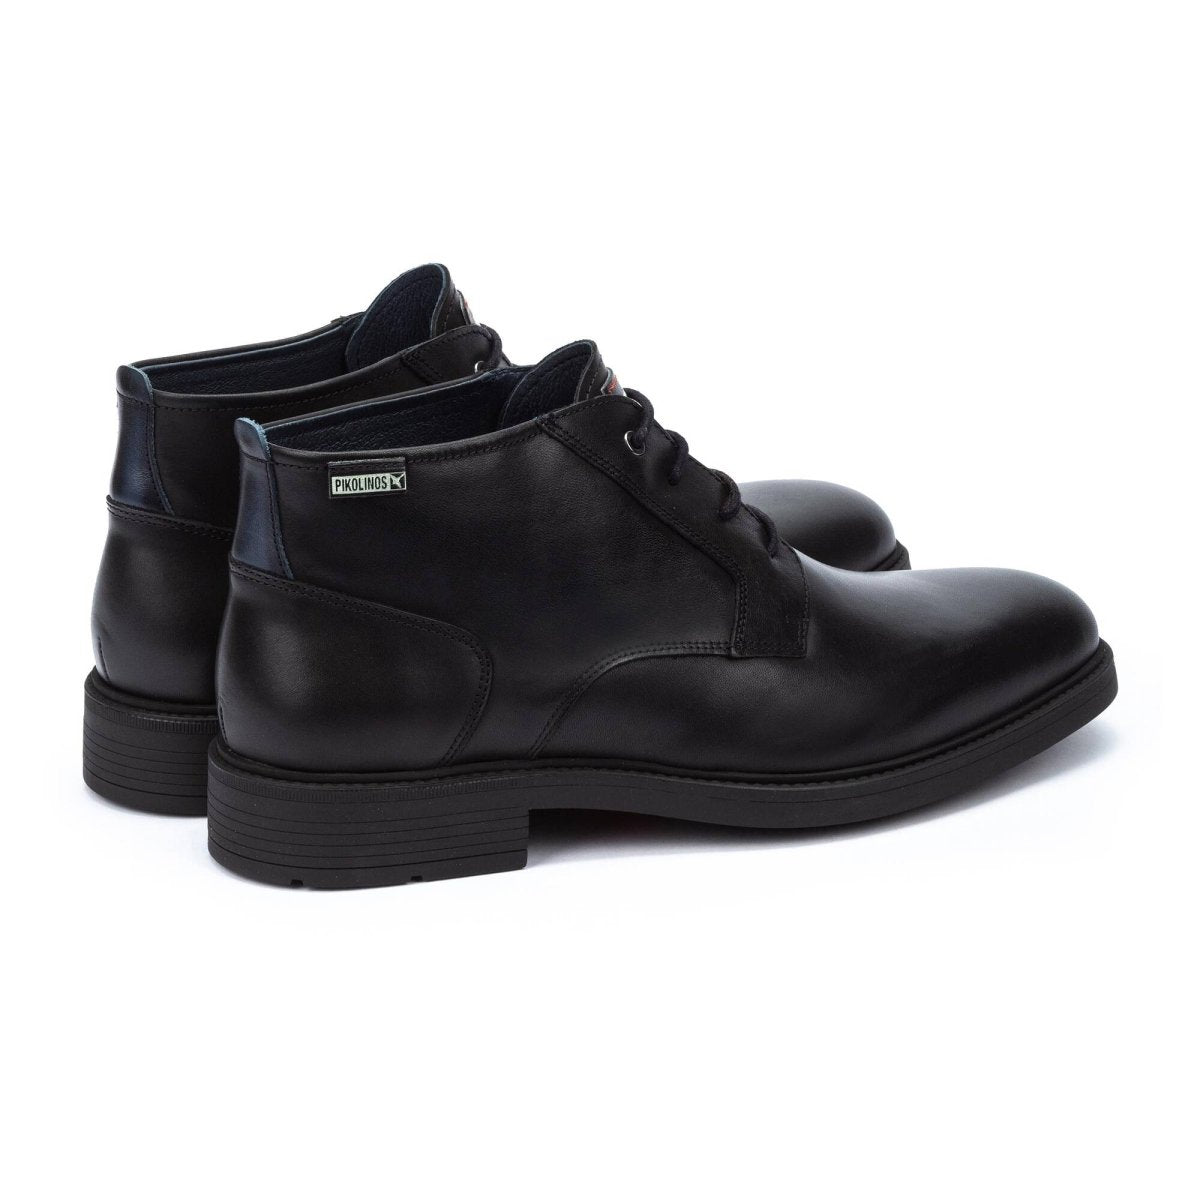 PIKOLINOS LORCA 02N-8080 MEN'S LACE-UP ANKLE BOOTS IN BLACK - TLW Shoes